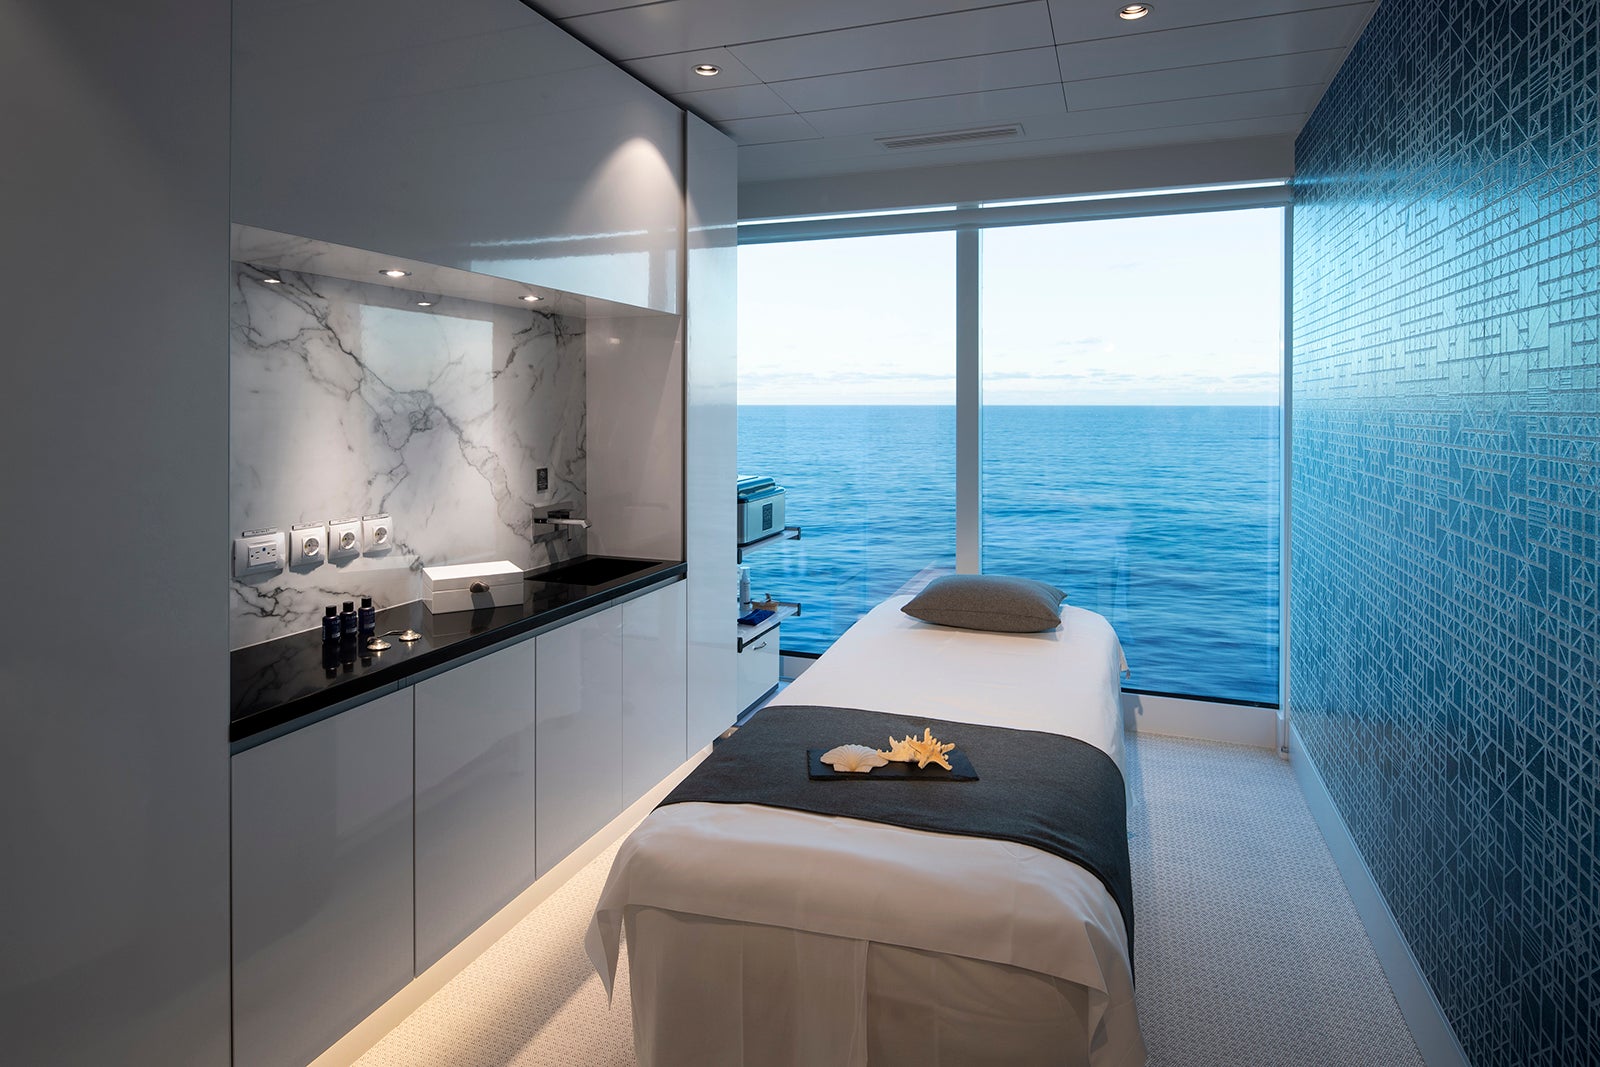 Massage bed facing window with ocean view in cruise ship spa treatment room.